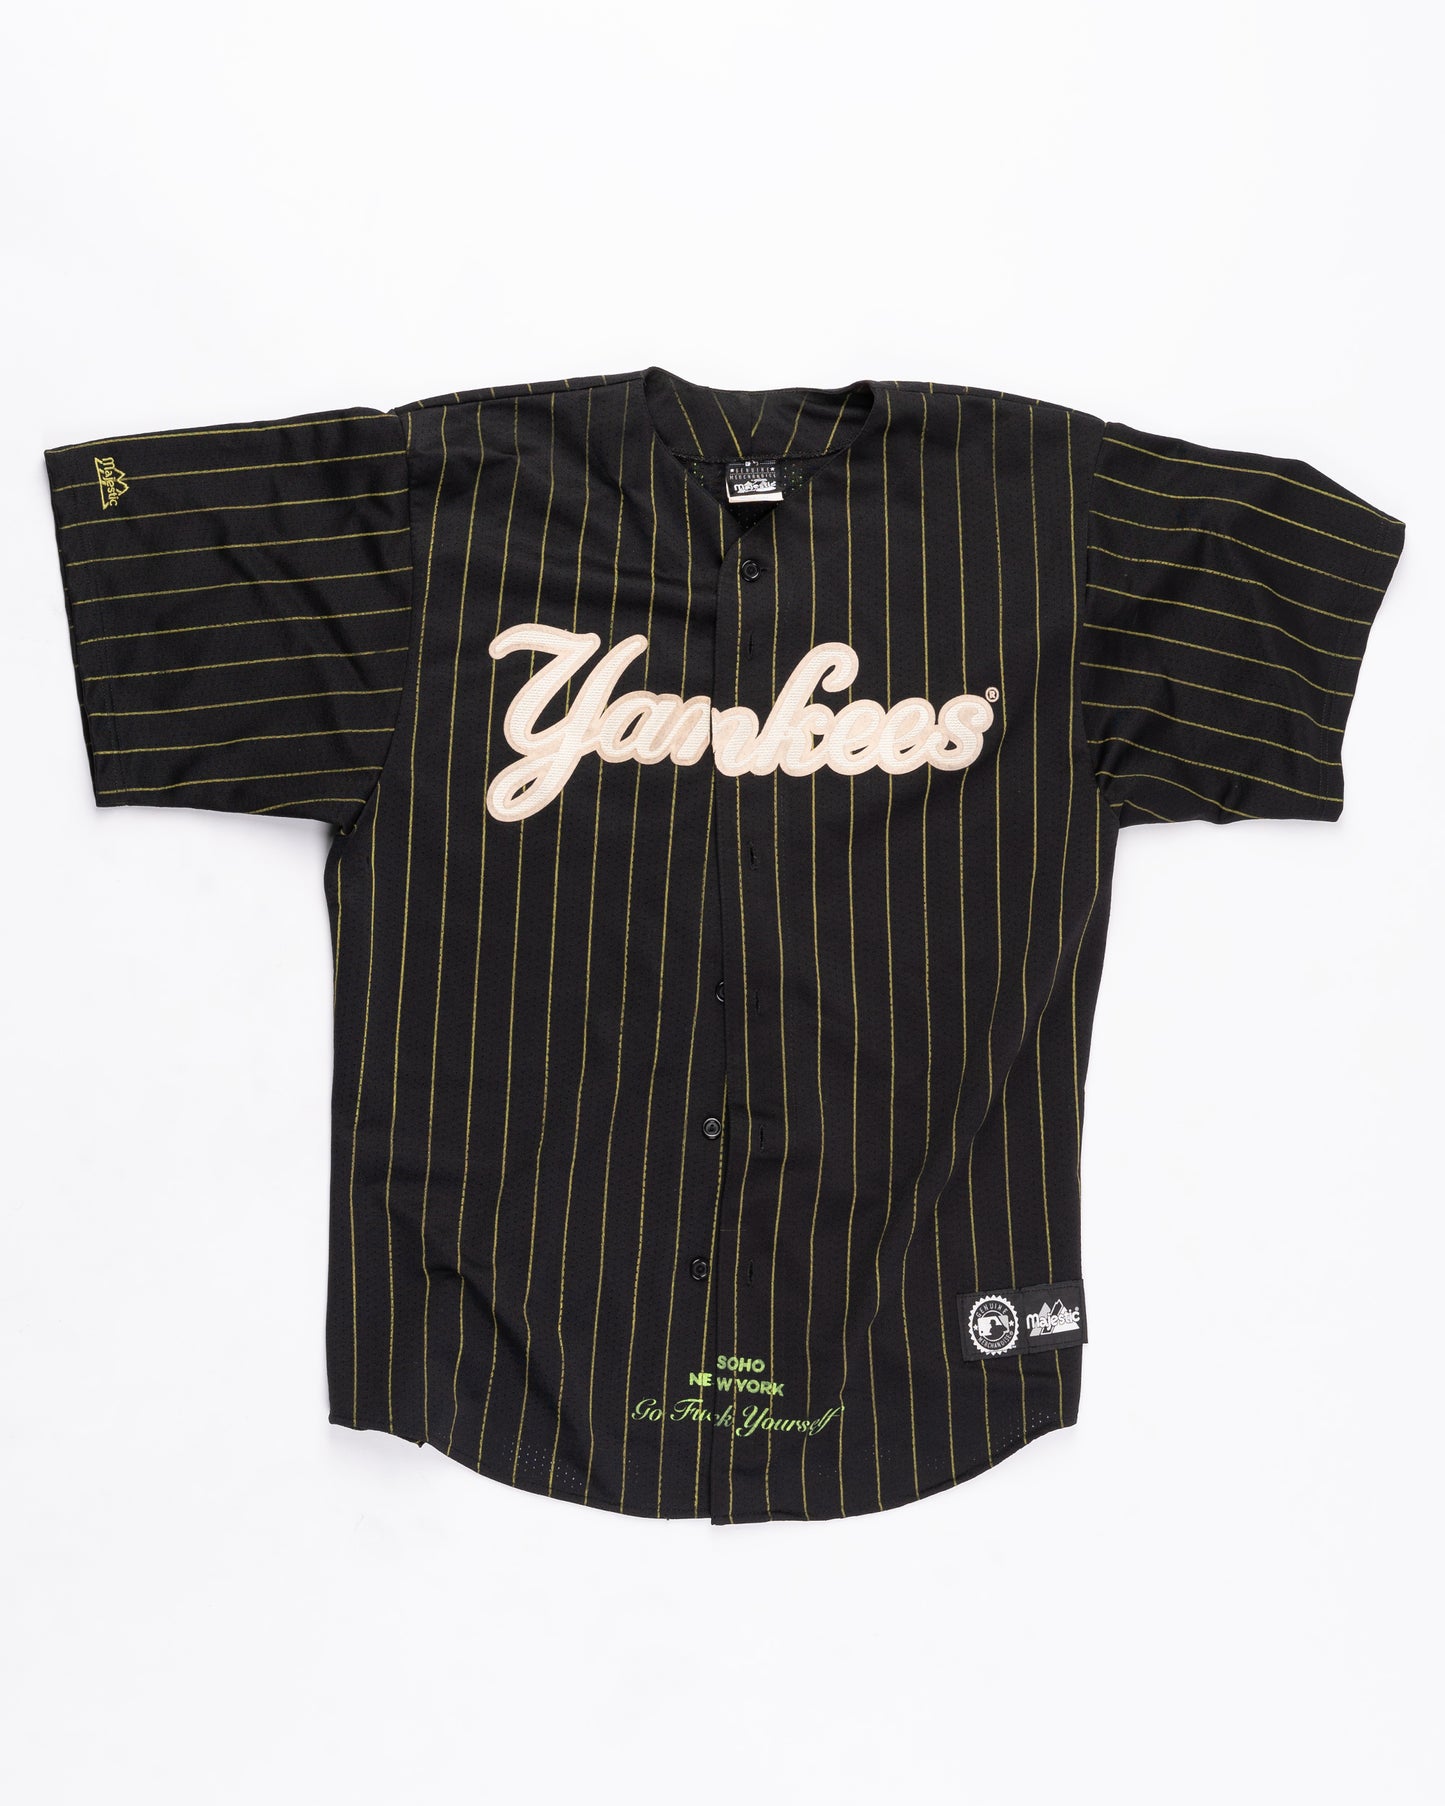 Yankees Jersey Size: Large